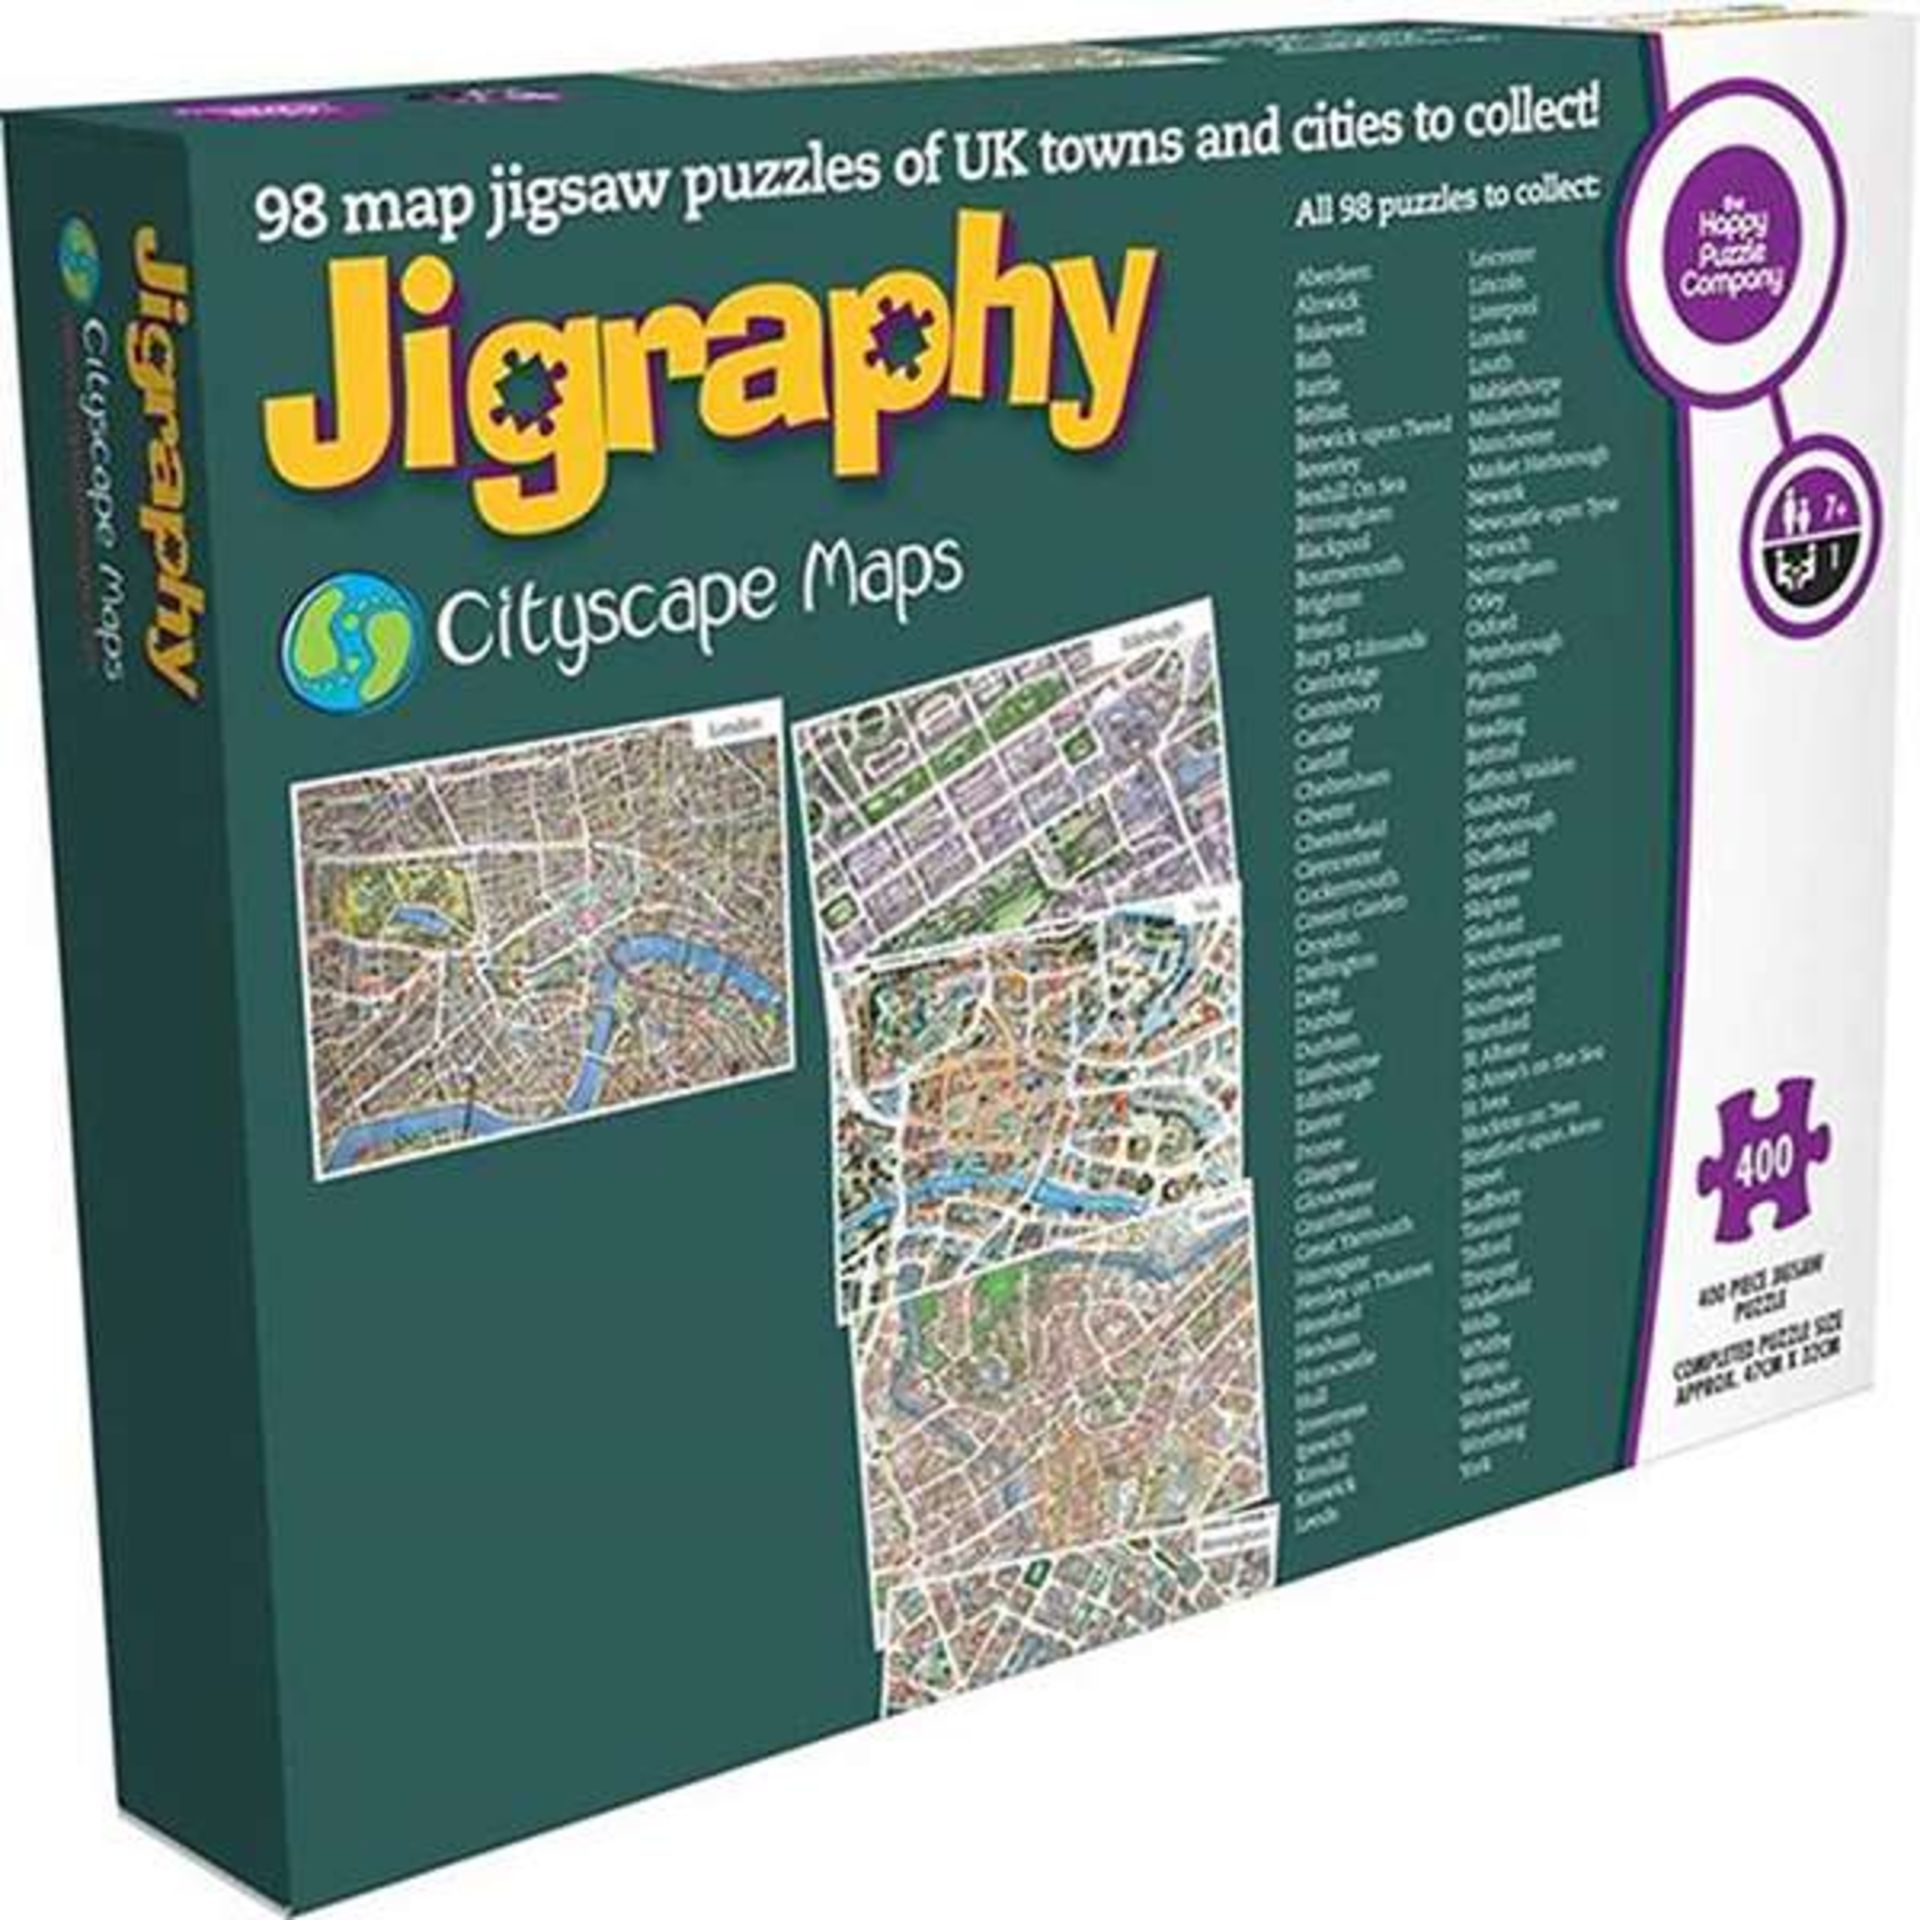 Jigraphy cityscape maps Brighton Jigsaw (Delivery Band A)